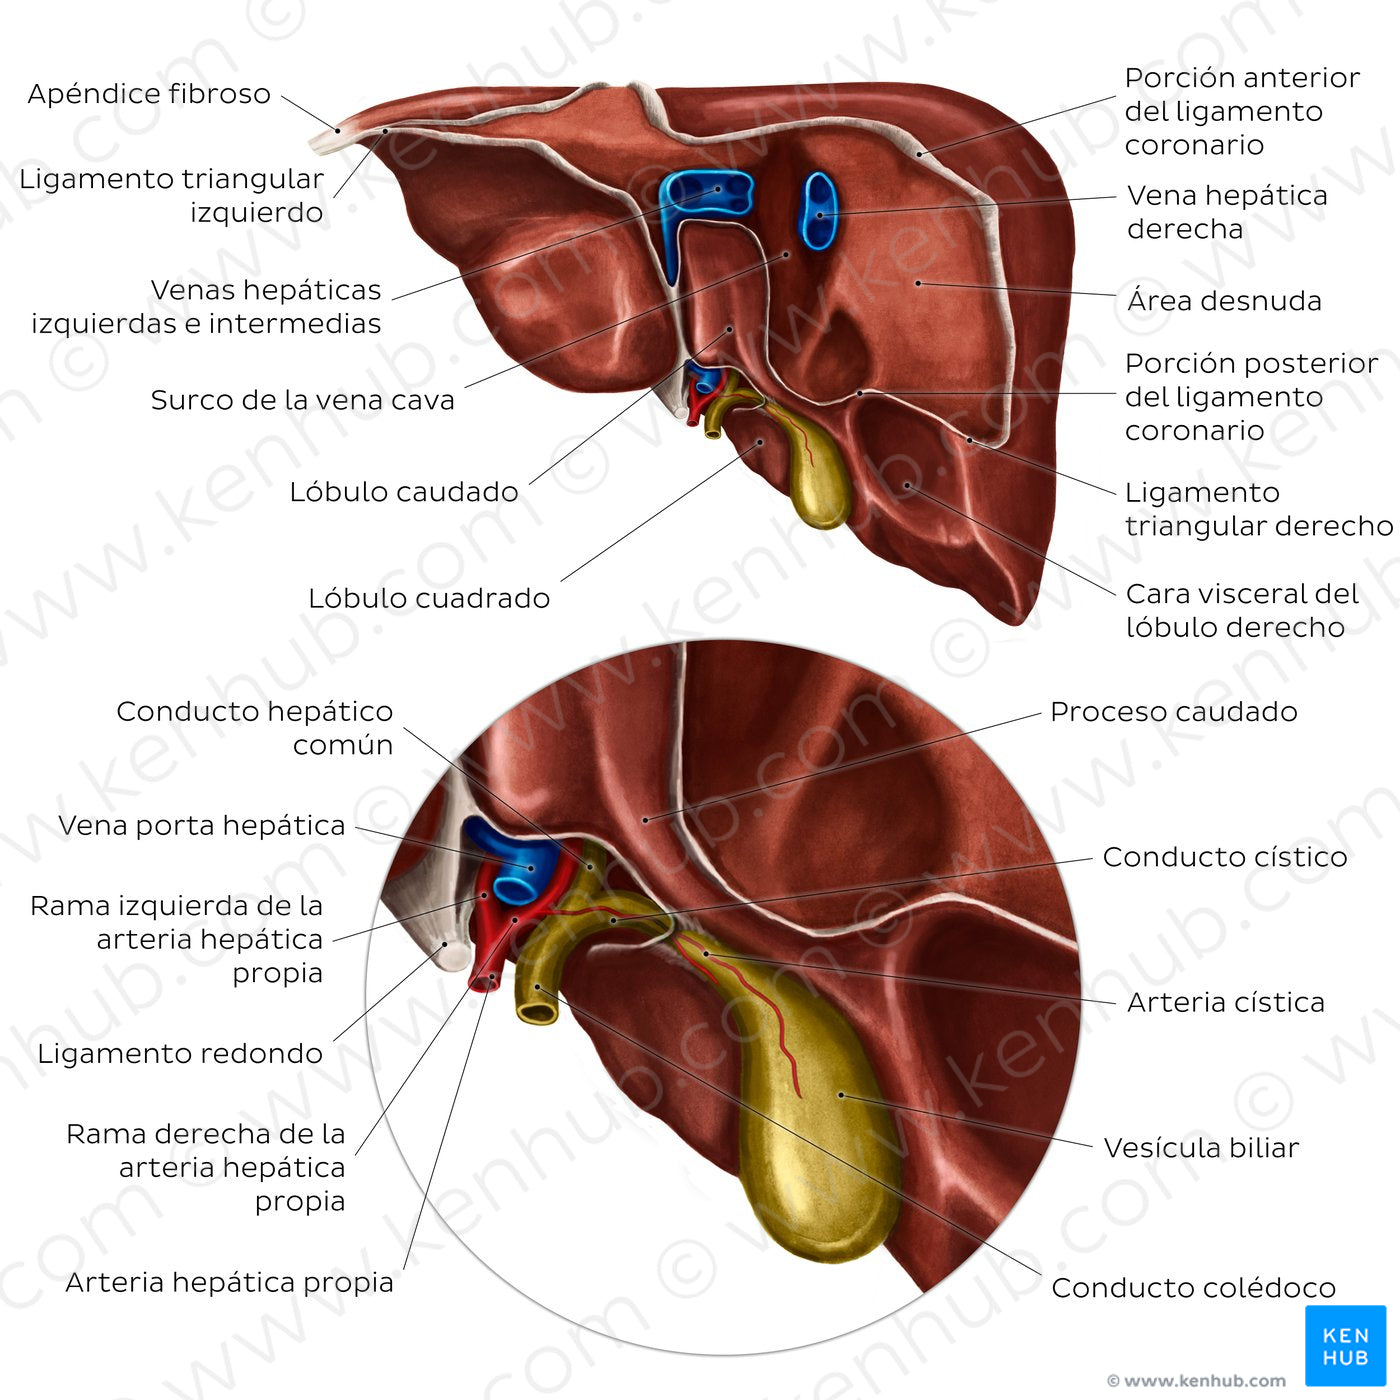 Posterior view of the liver (Spanish)